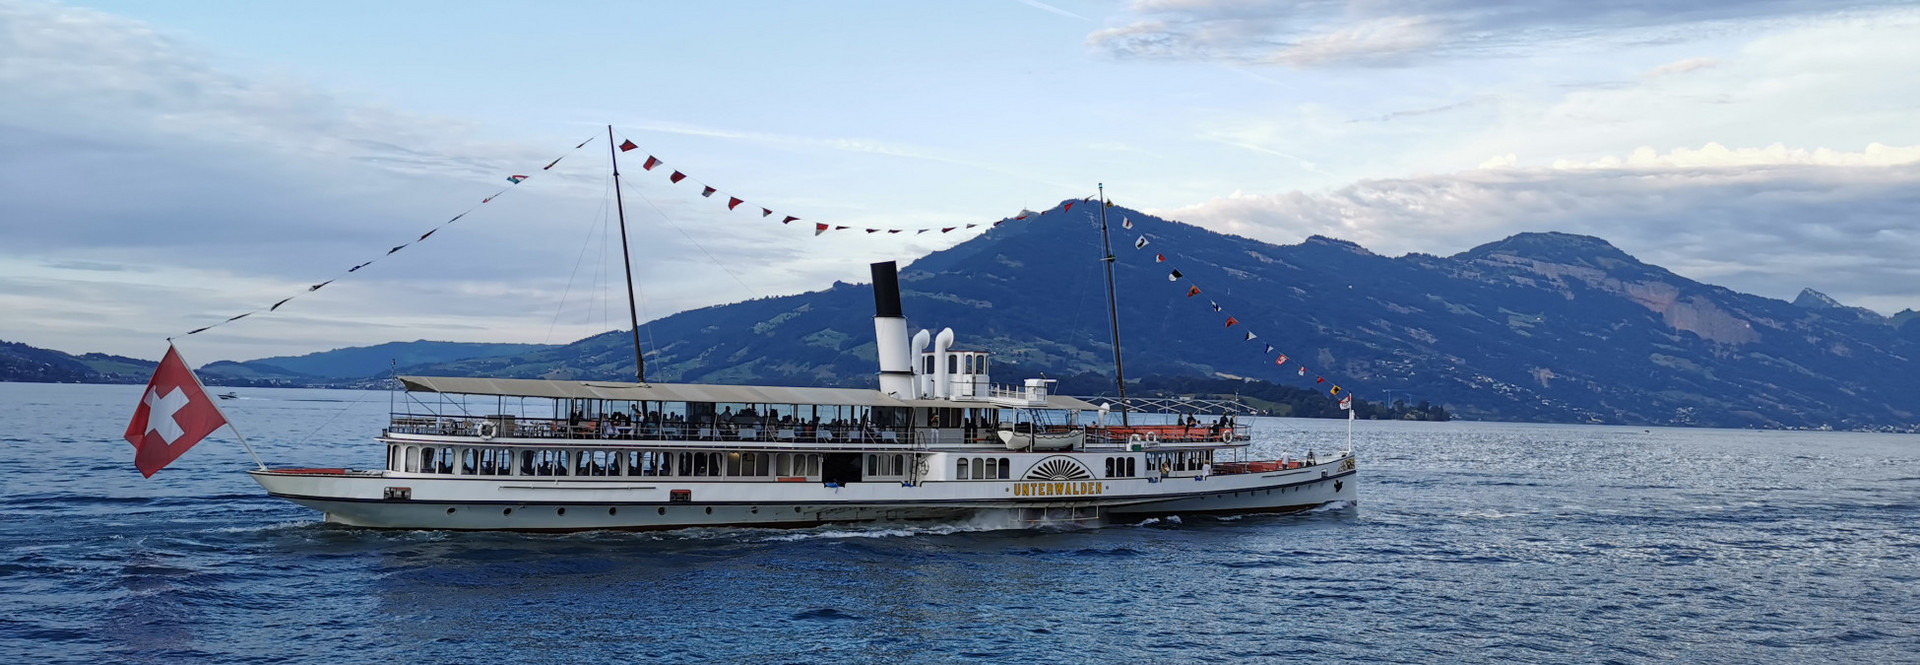 Guests spend a wonderful 1st august evening on the paddle steamer Unterwalden on Lake Lucerne.